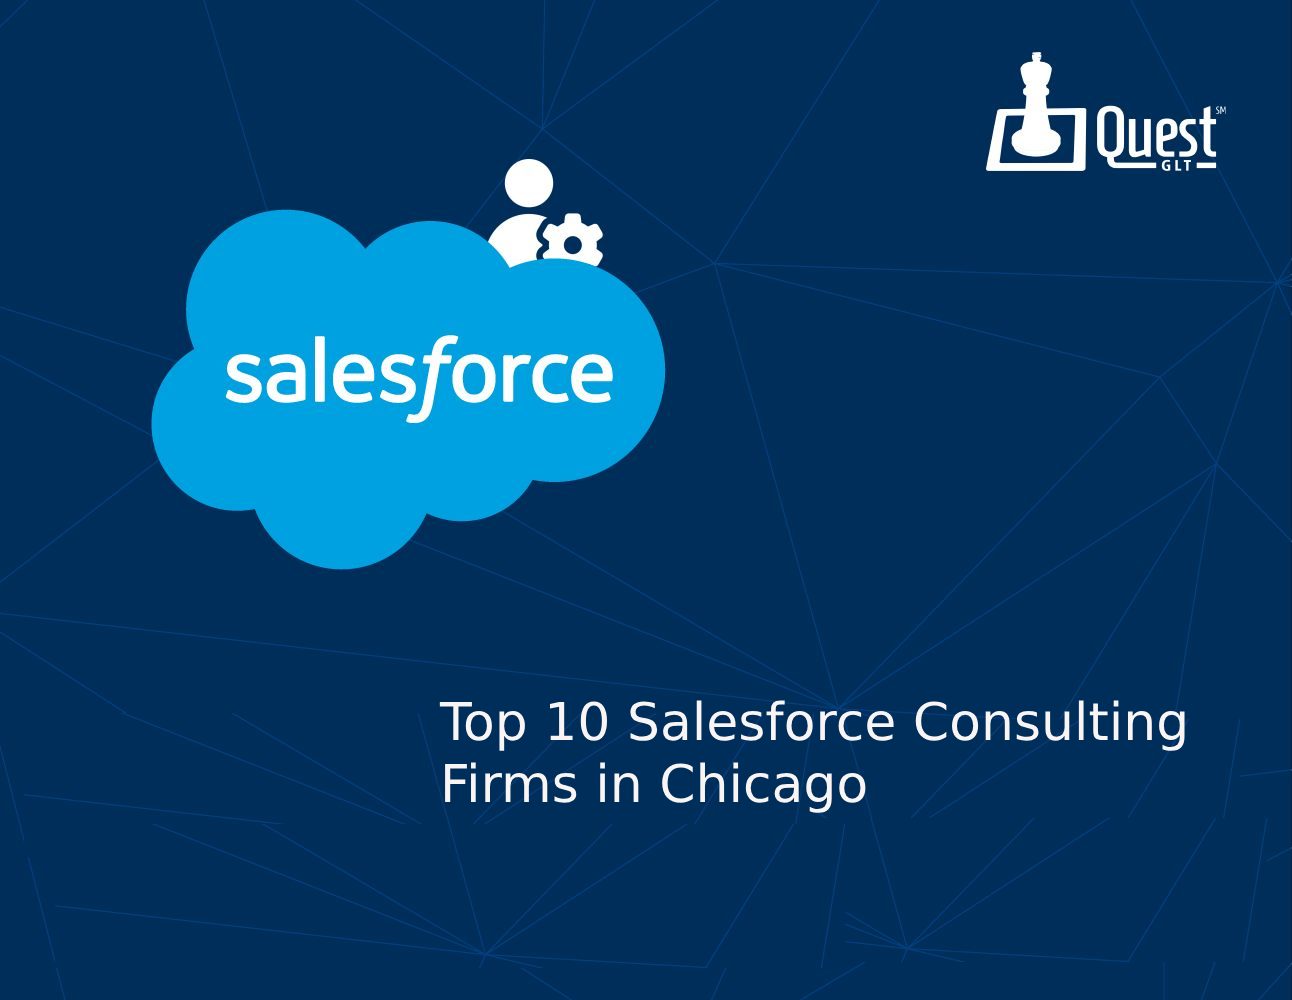 Top 10 Salesforce Consulting Firms in Chicago